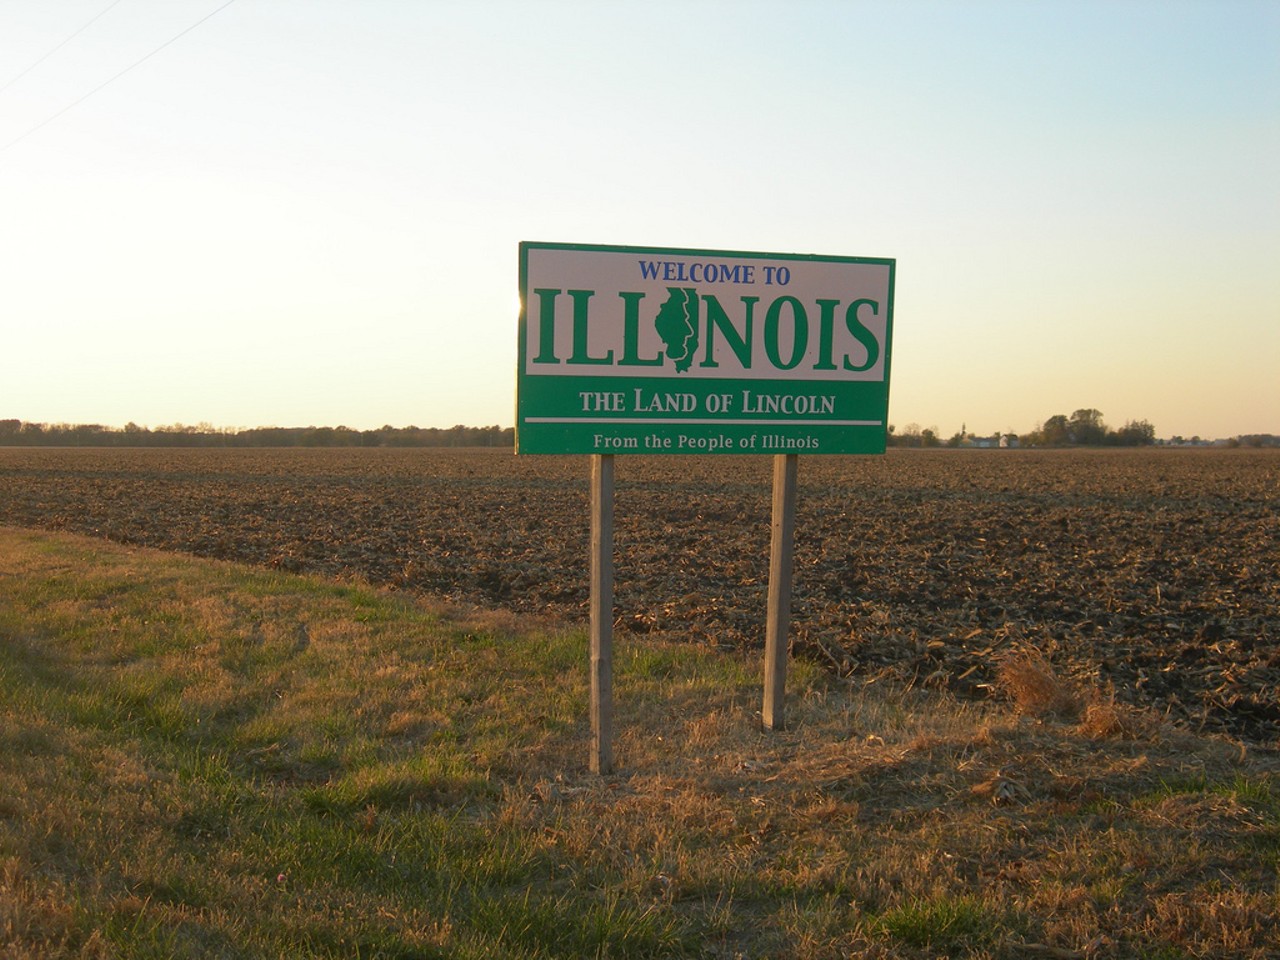 Illinois
Some people around here really think that you're supposed to prounounce the "S" and make it "Ill-en-NOISE"
Photo courtesy of Jimmy Emerson / DVM